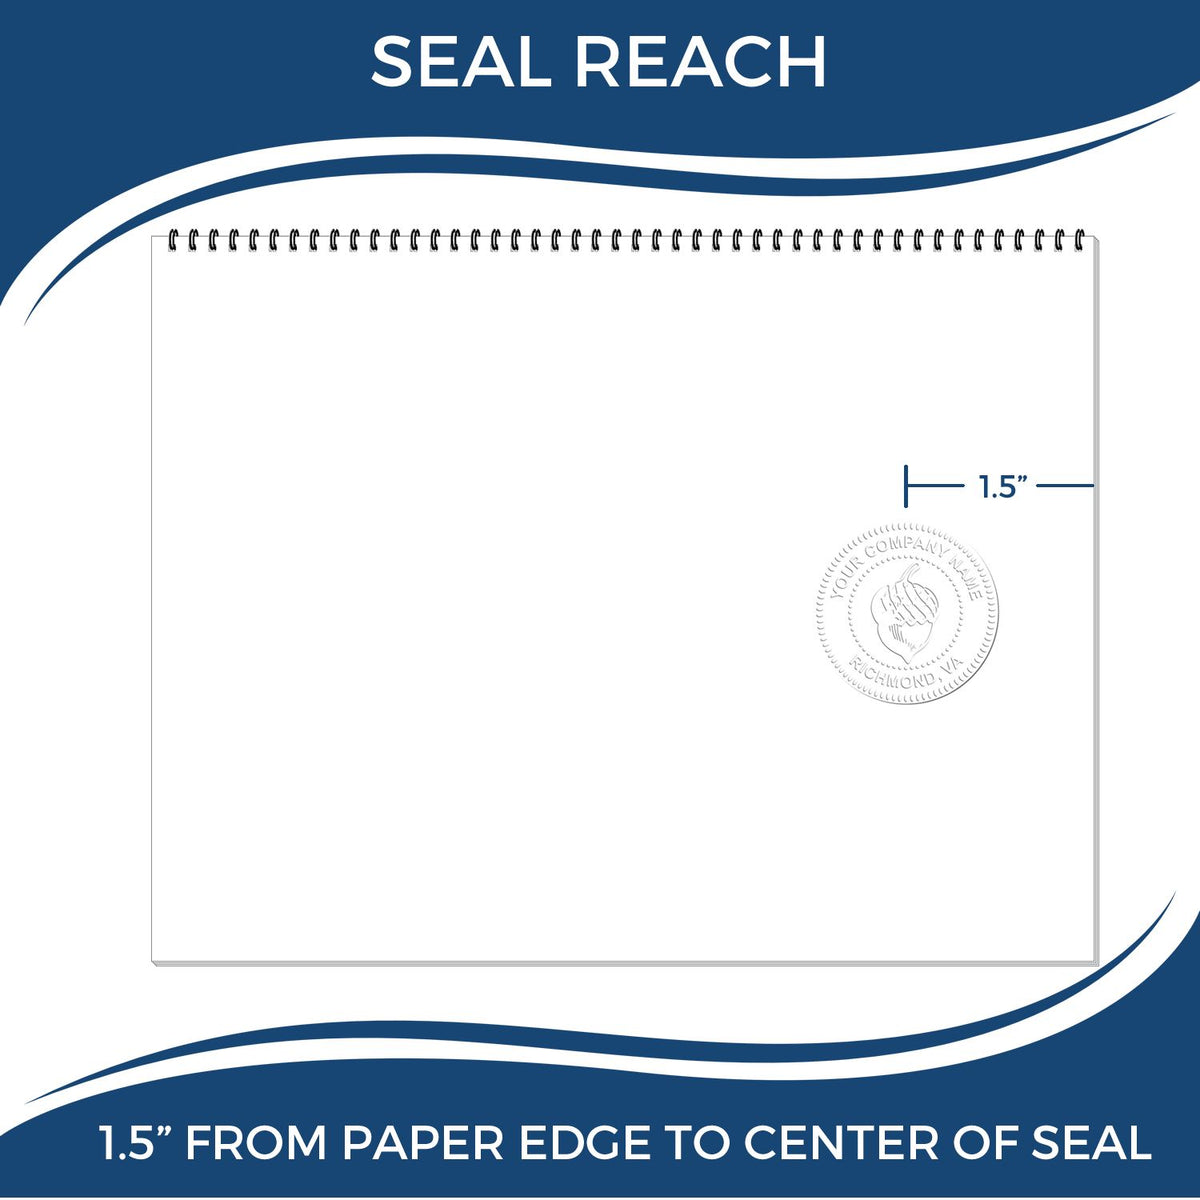 An infographic showing the seal reach which is represented by a ruler and a miniature seal image of the Louisiana Desk Architect Embossing Seal